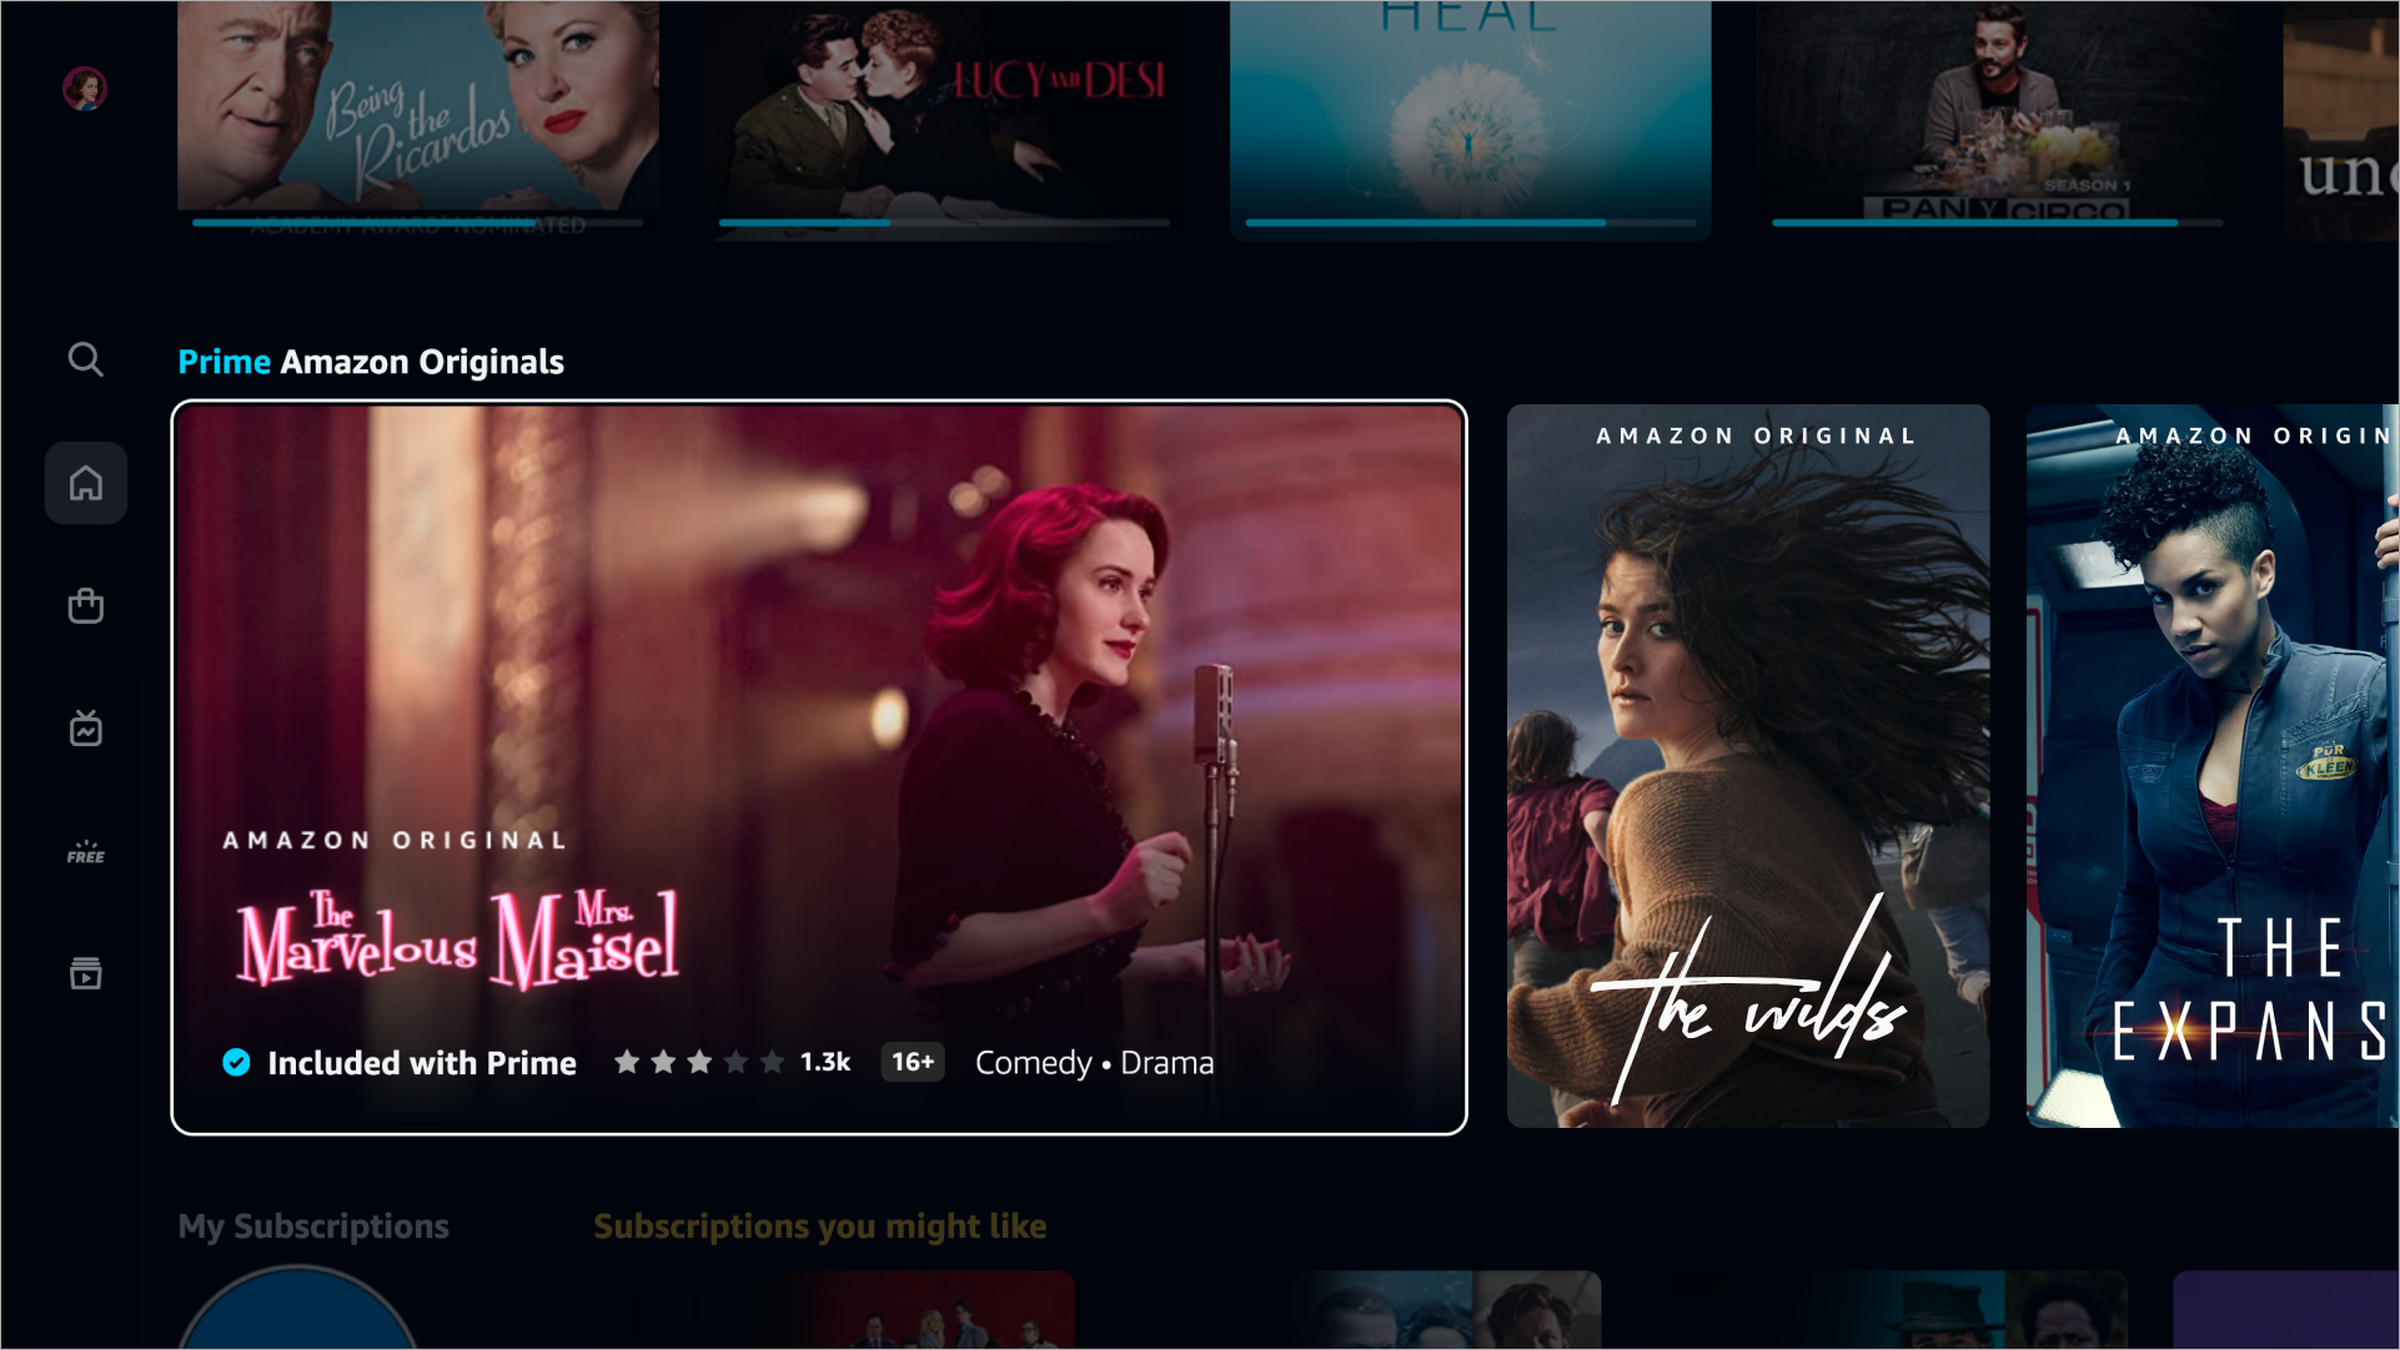 The new Prime Video is meant to feel less cluttered.